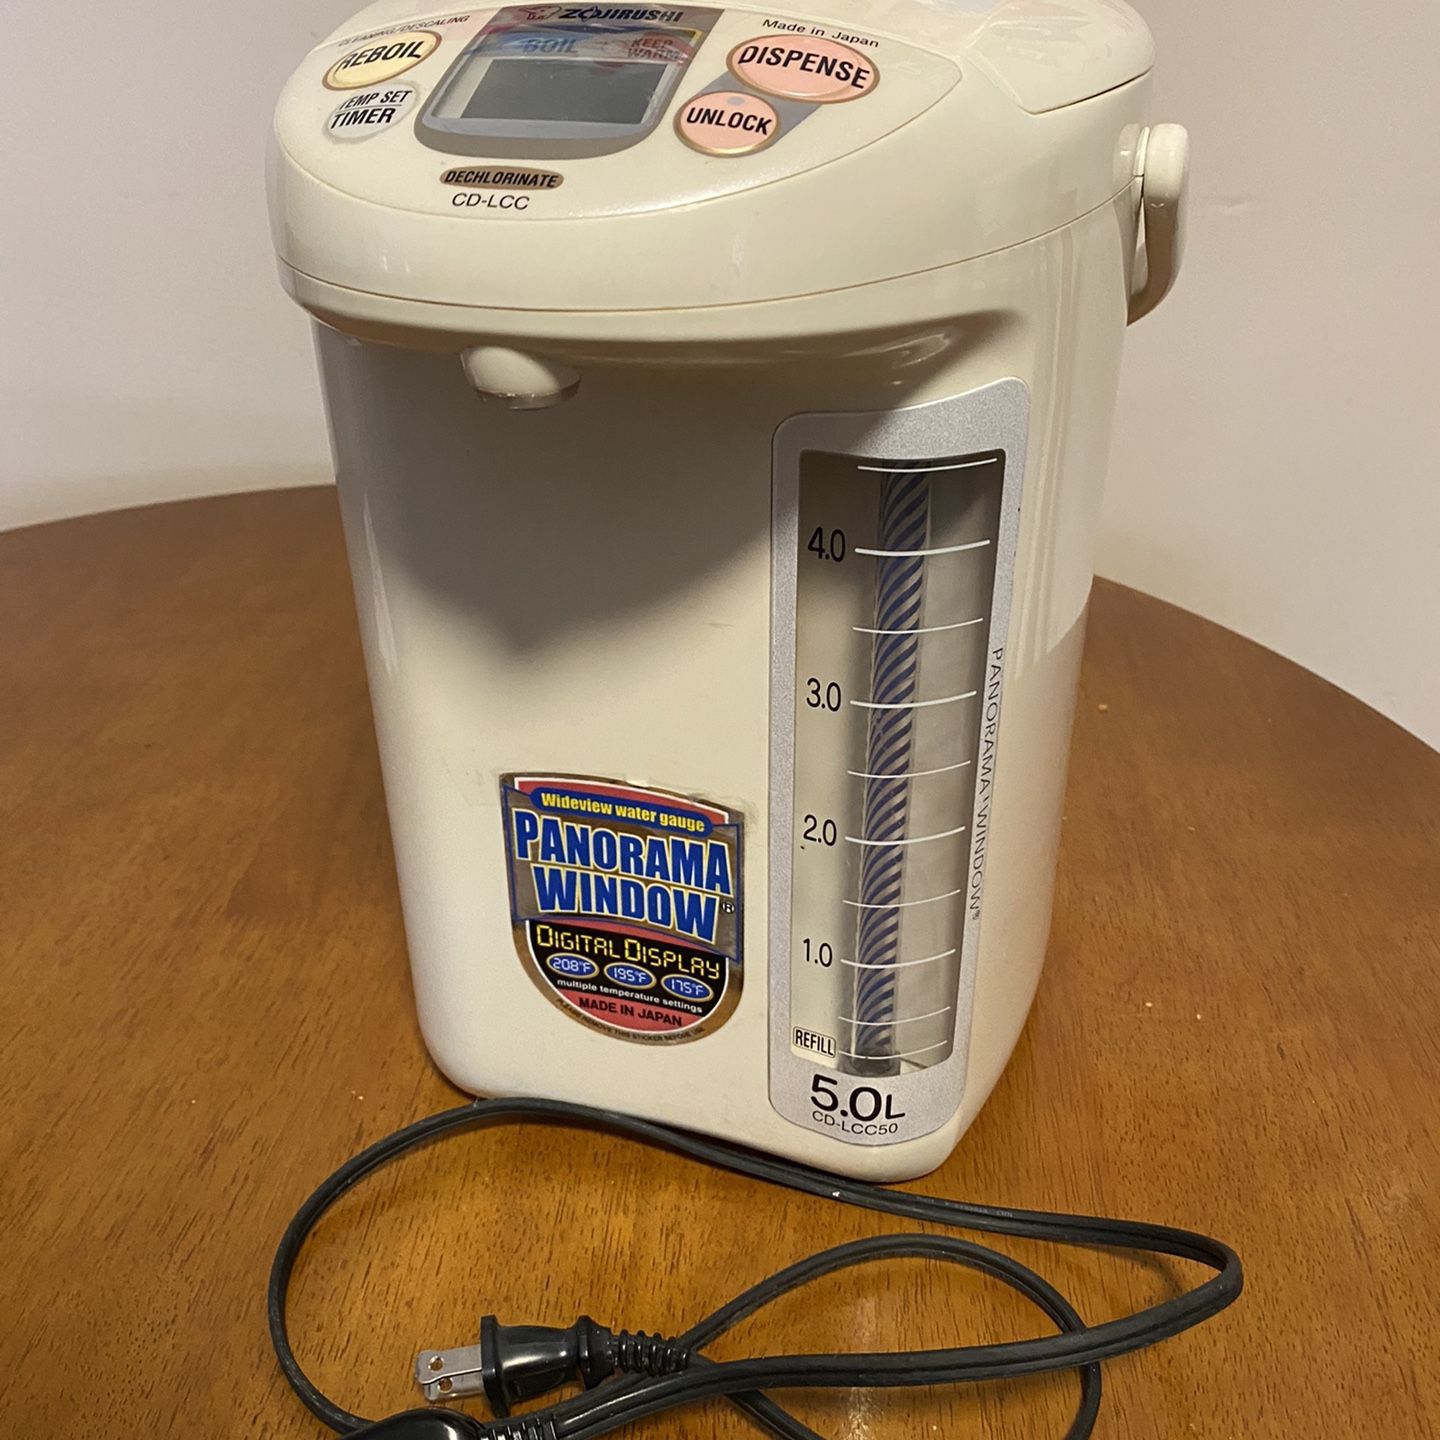 Zojirushi 5 L Liter Electric Water Boiler Made In Japan for Sale in  Brooklyn, NY - OfferUp